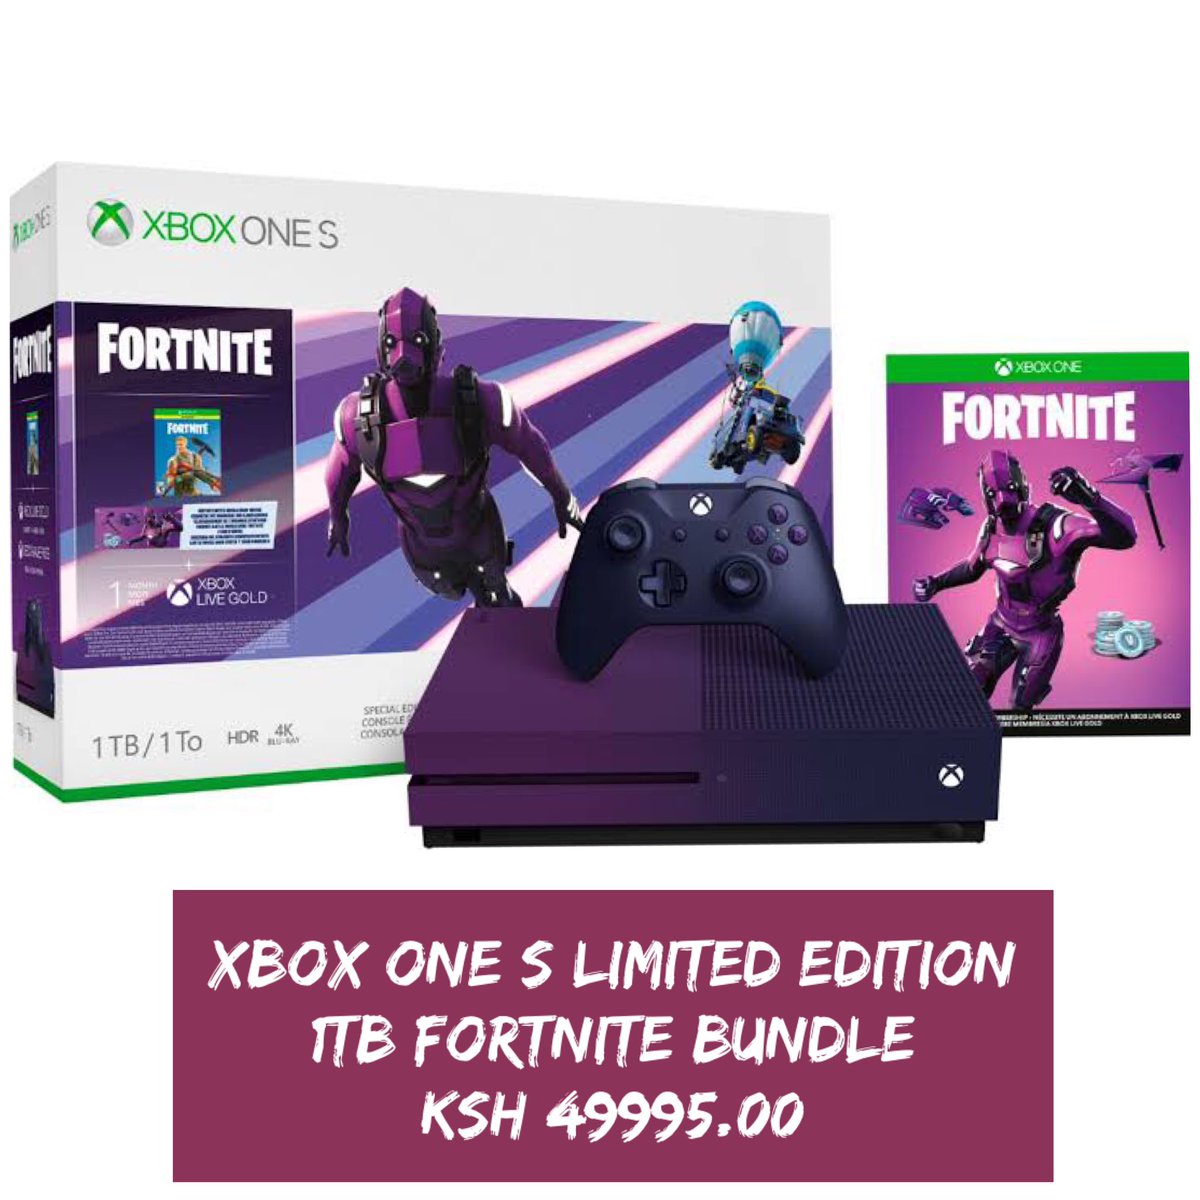 Gamechanger Kenya On Twitter Get A Touch Of Purple Royalty This September This Limited Edition Xbox One S 1tb Gradient Purple Console Comes Bundled With A Full Game Download Of Fortnight Battle